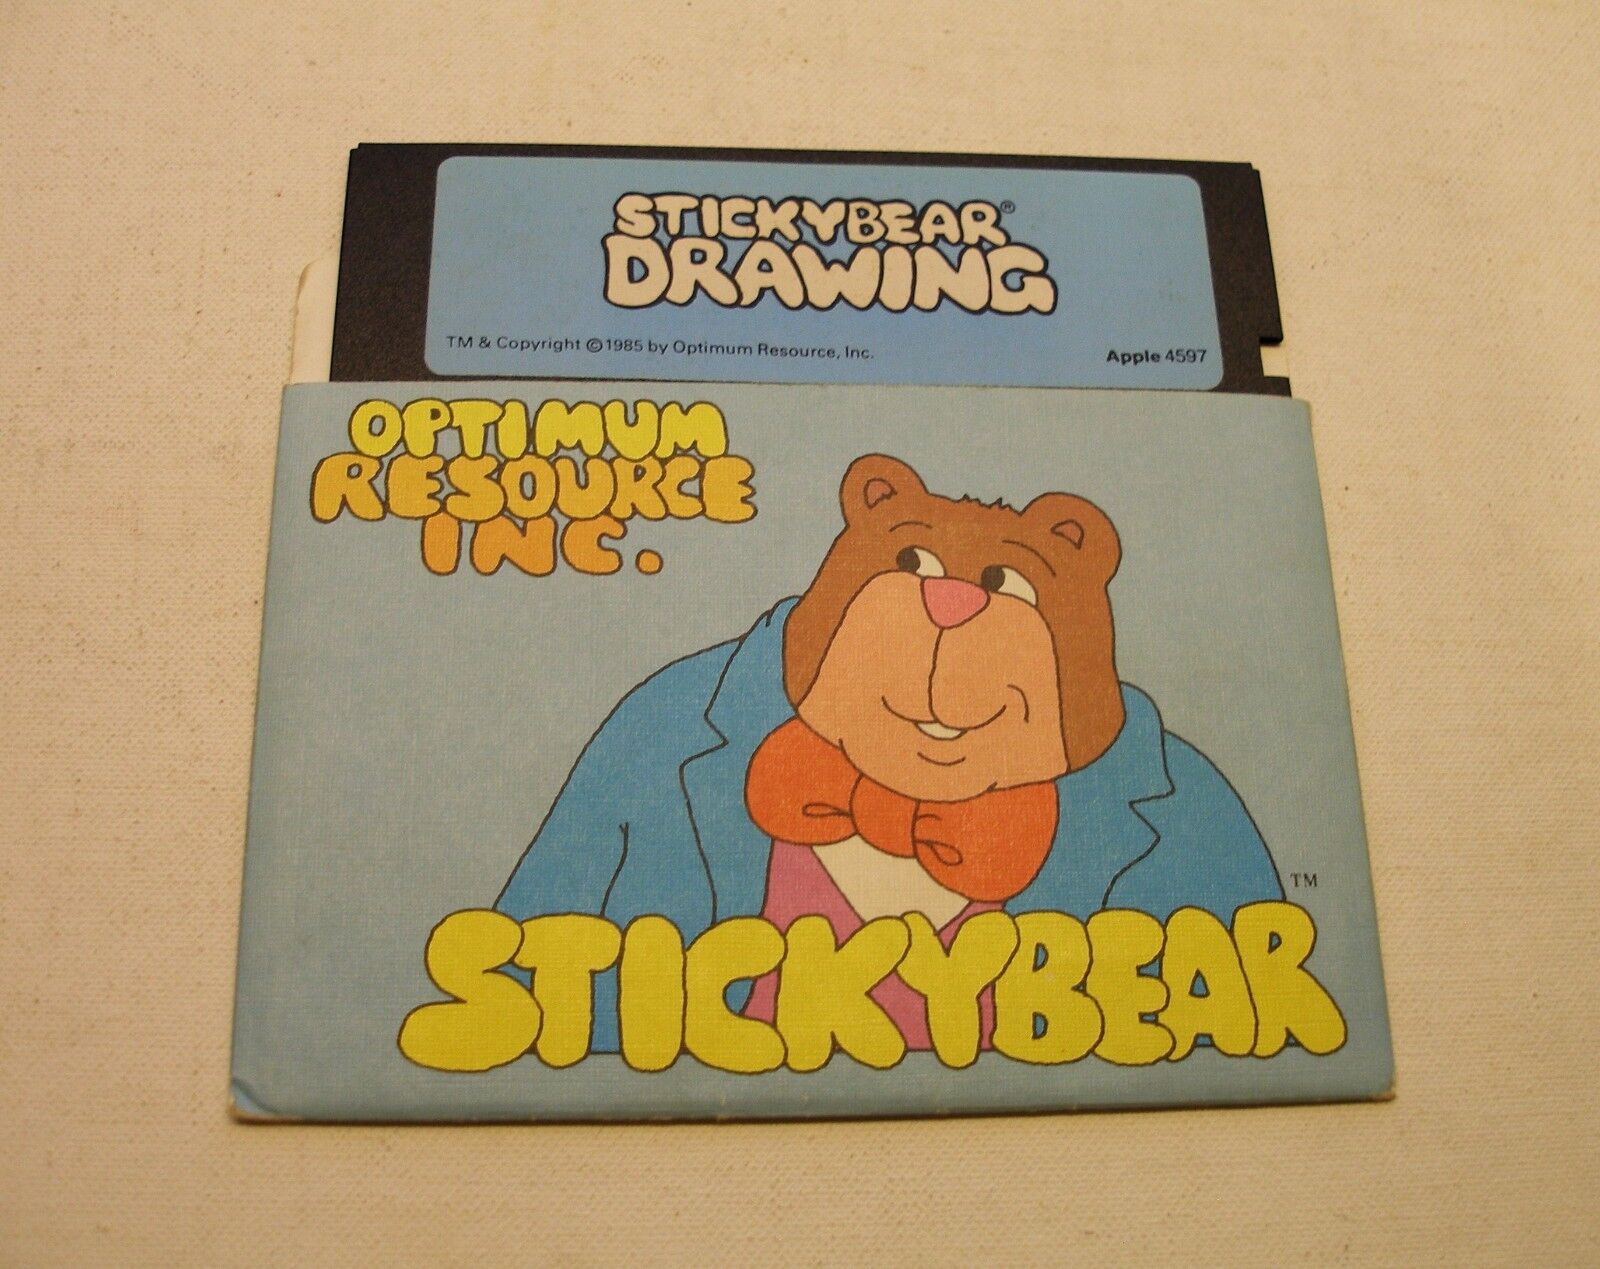 Stickybear Typing Disk by Weekly Reader for Apple IIe, Apple IIc, Apple IIGS